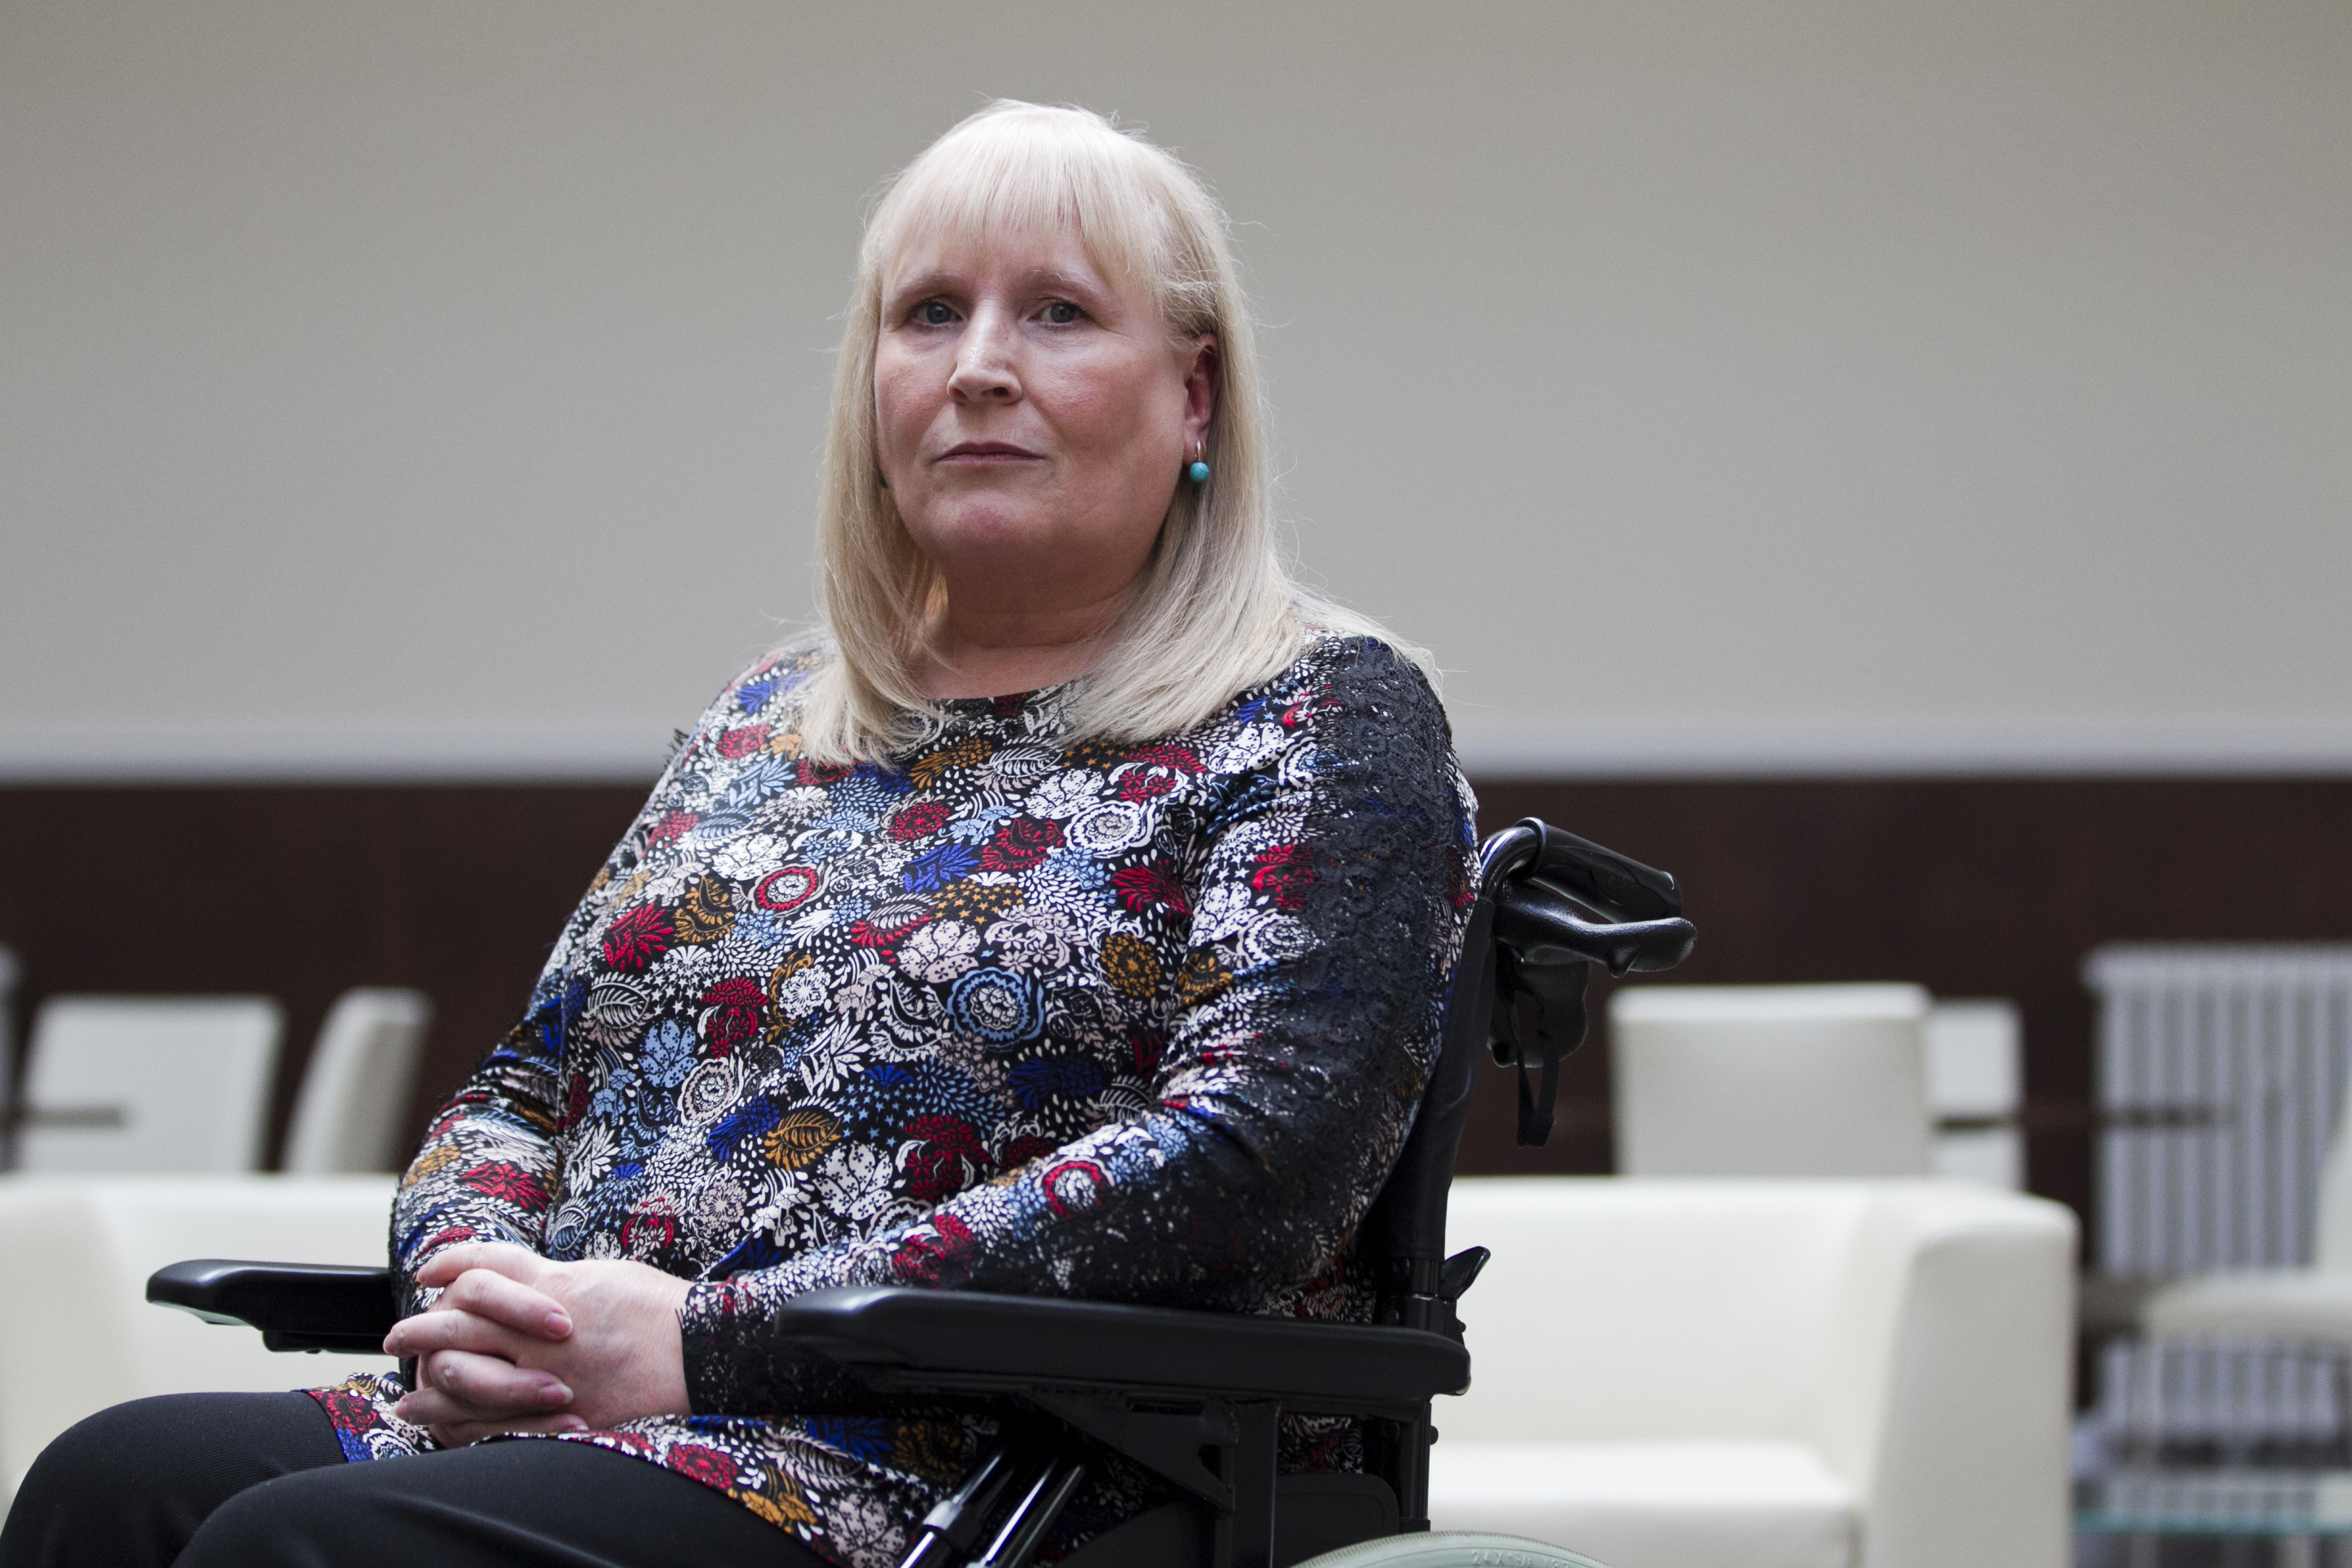 Elaine Holmes, a founding member of Scottish Mesh Survivors, says the Scottish Government dragging its feet on redress for victims is ‘shameful’.